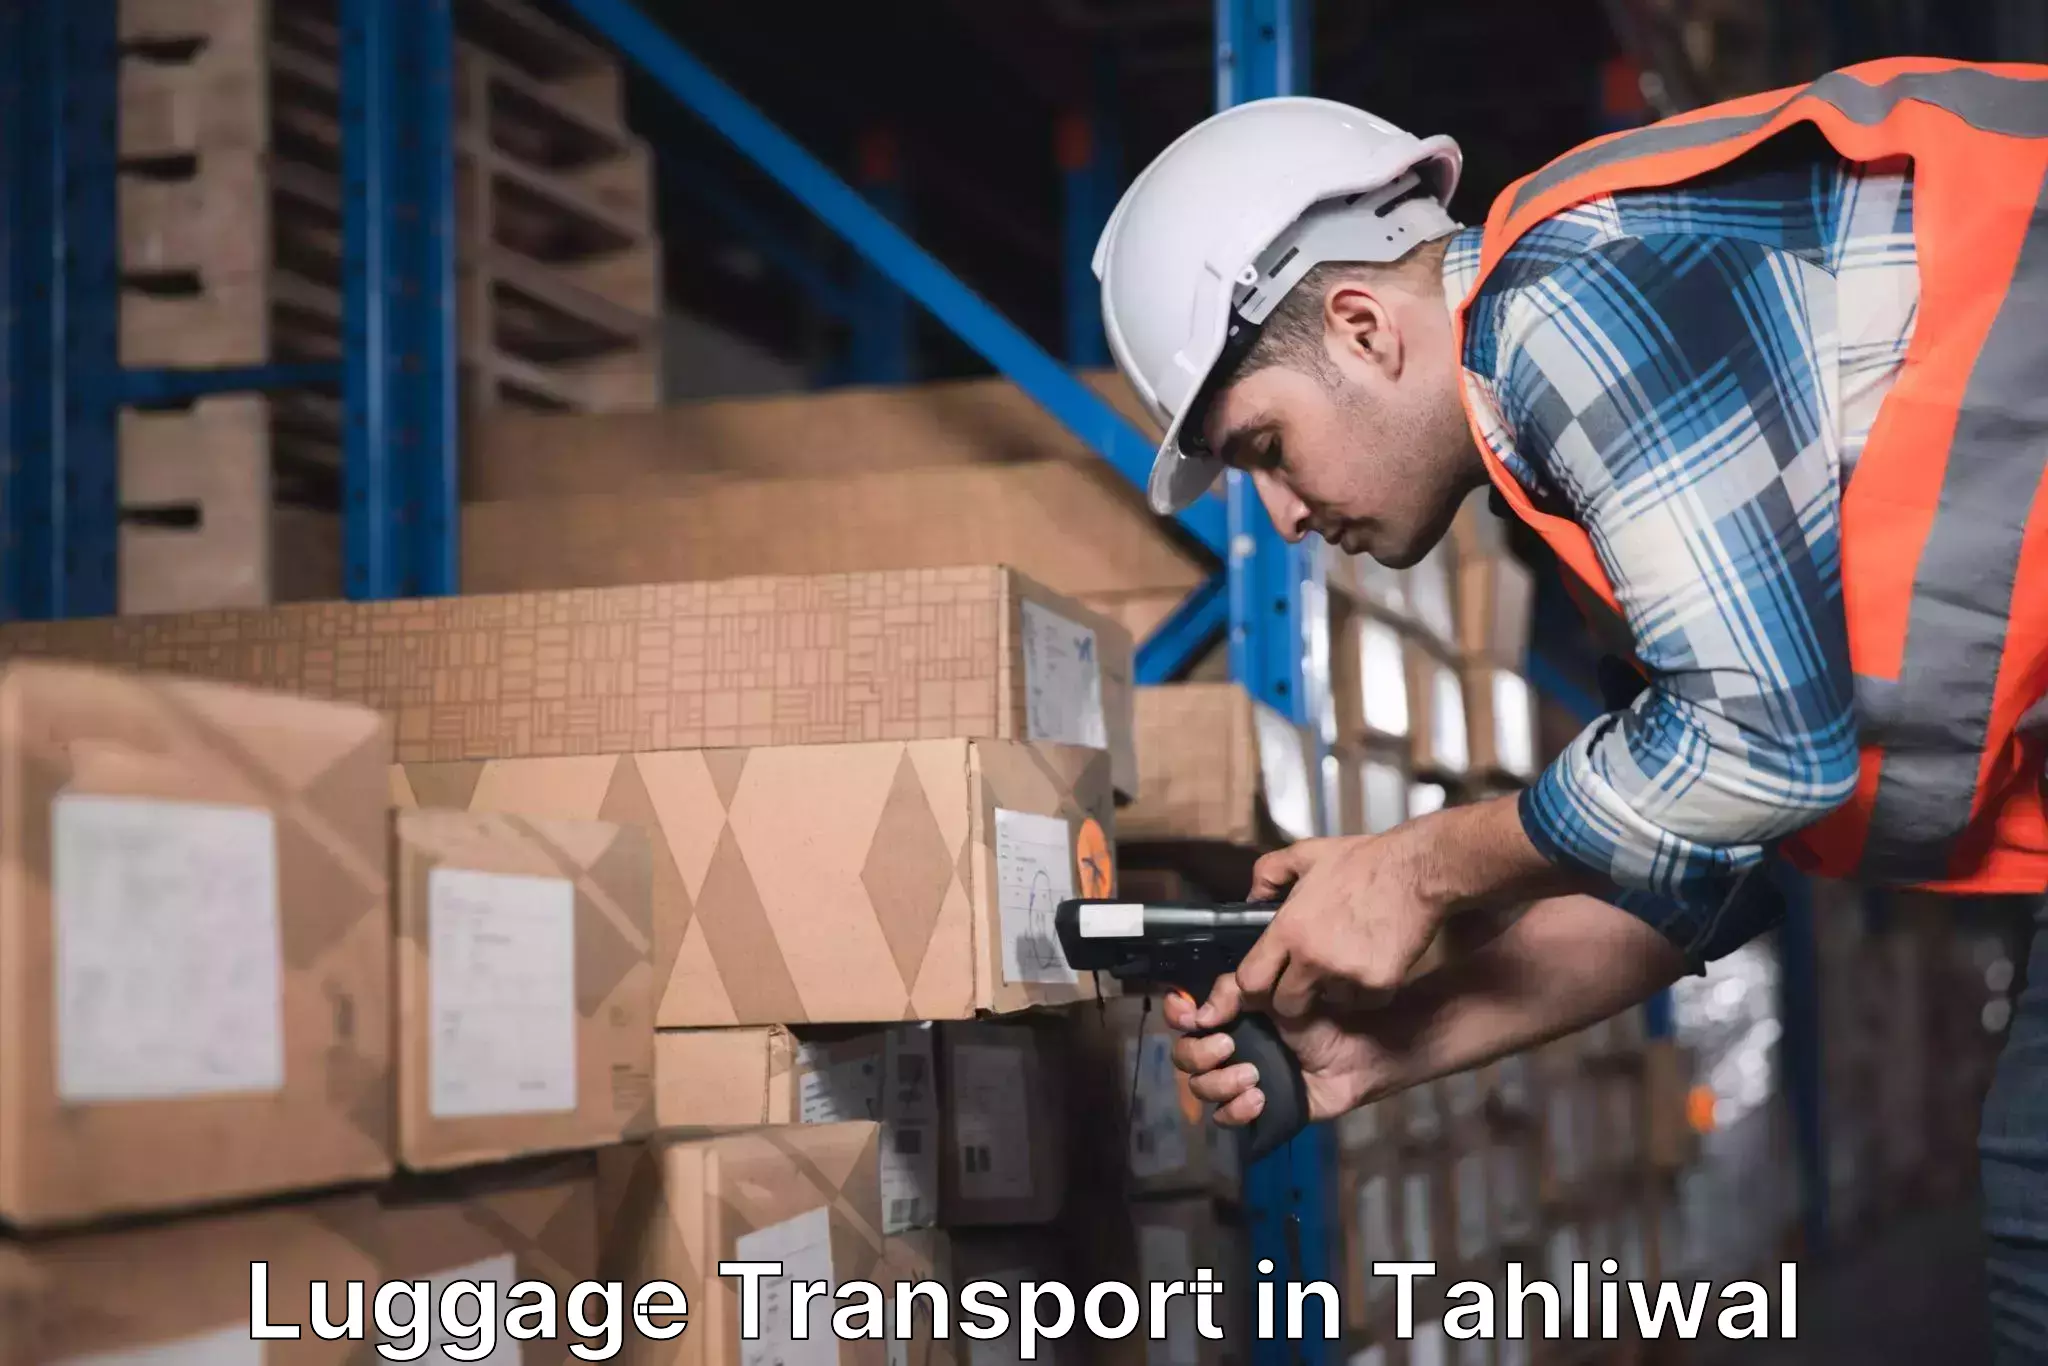 Luggage transport rates in Tahliwal